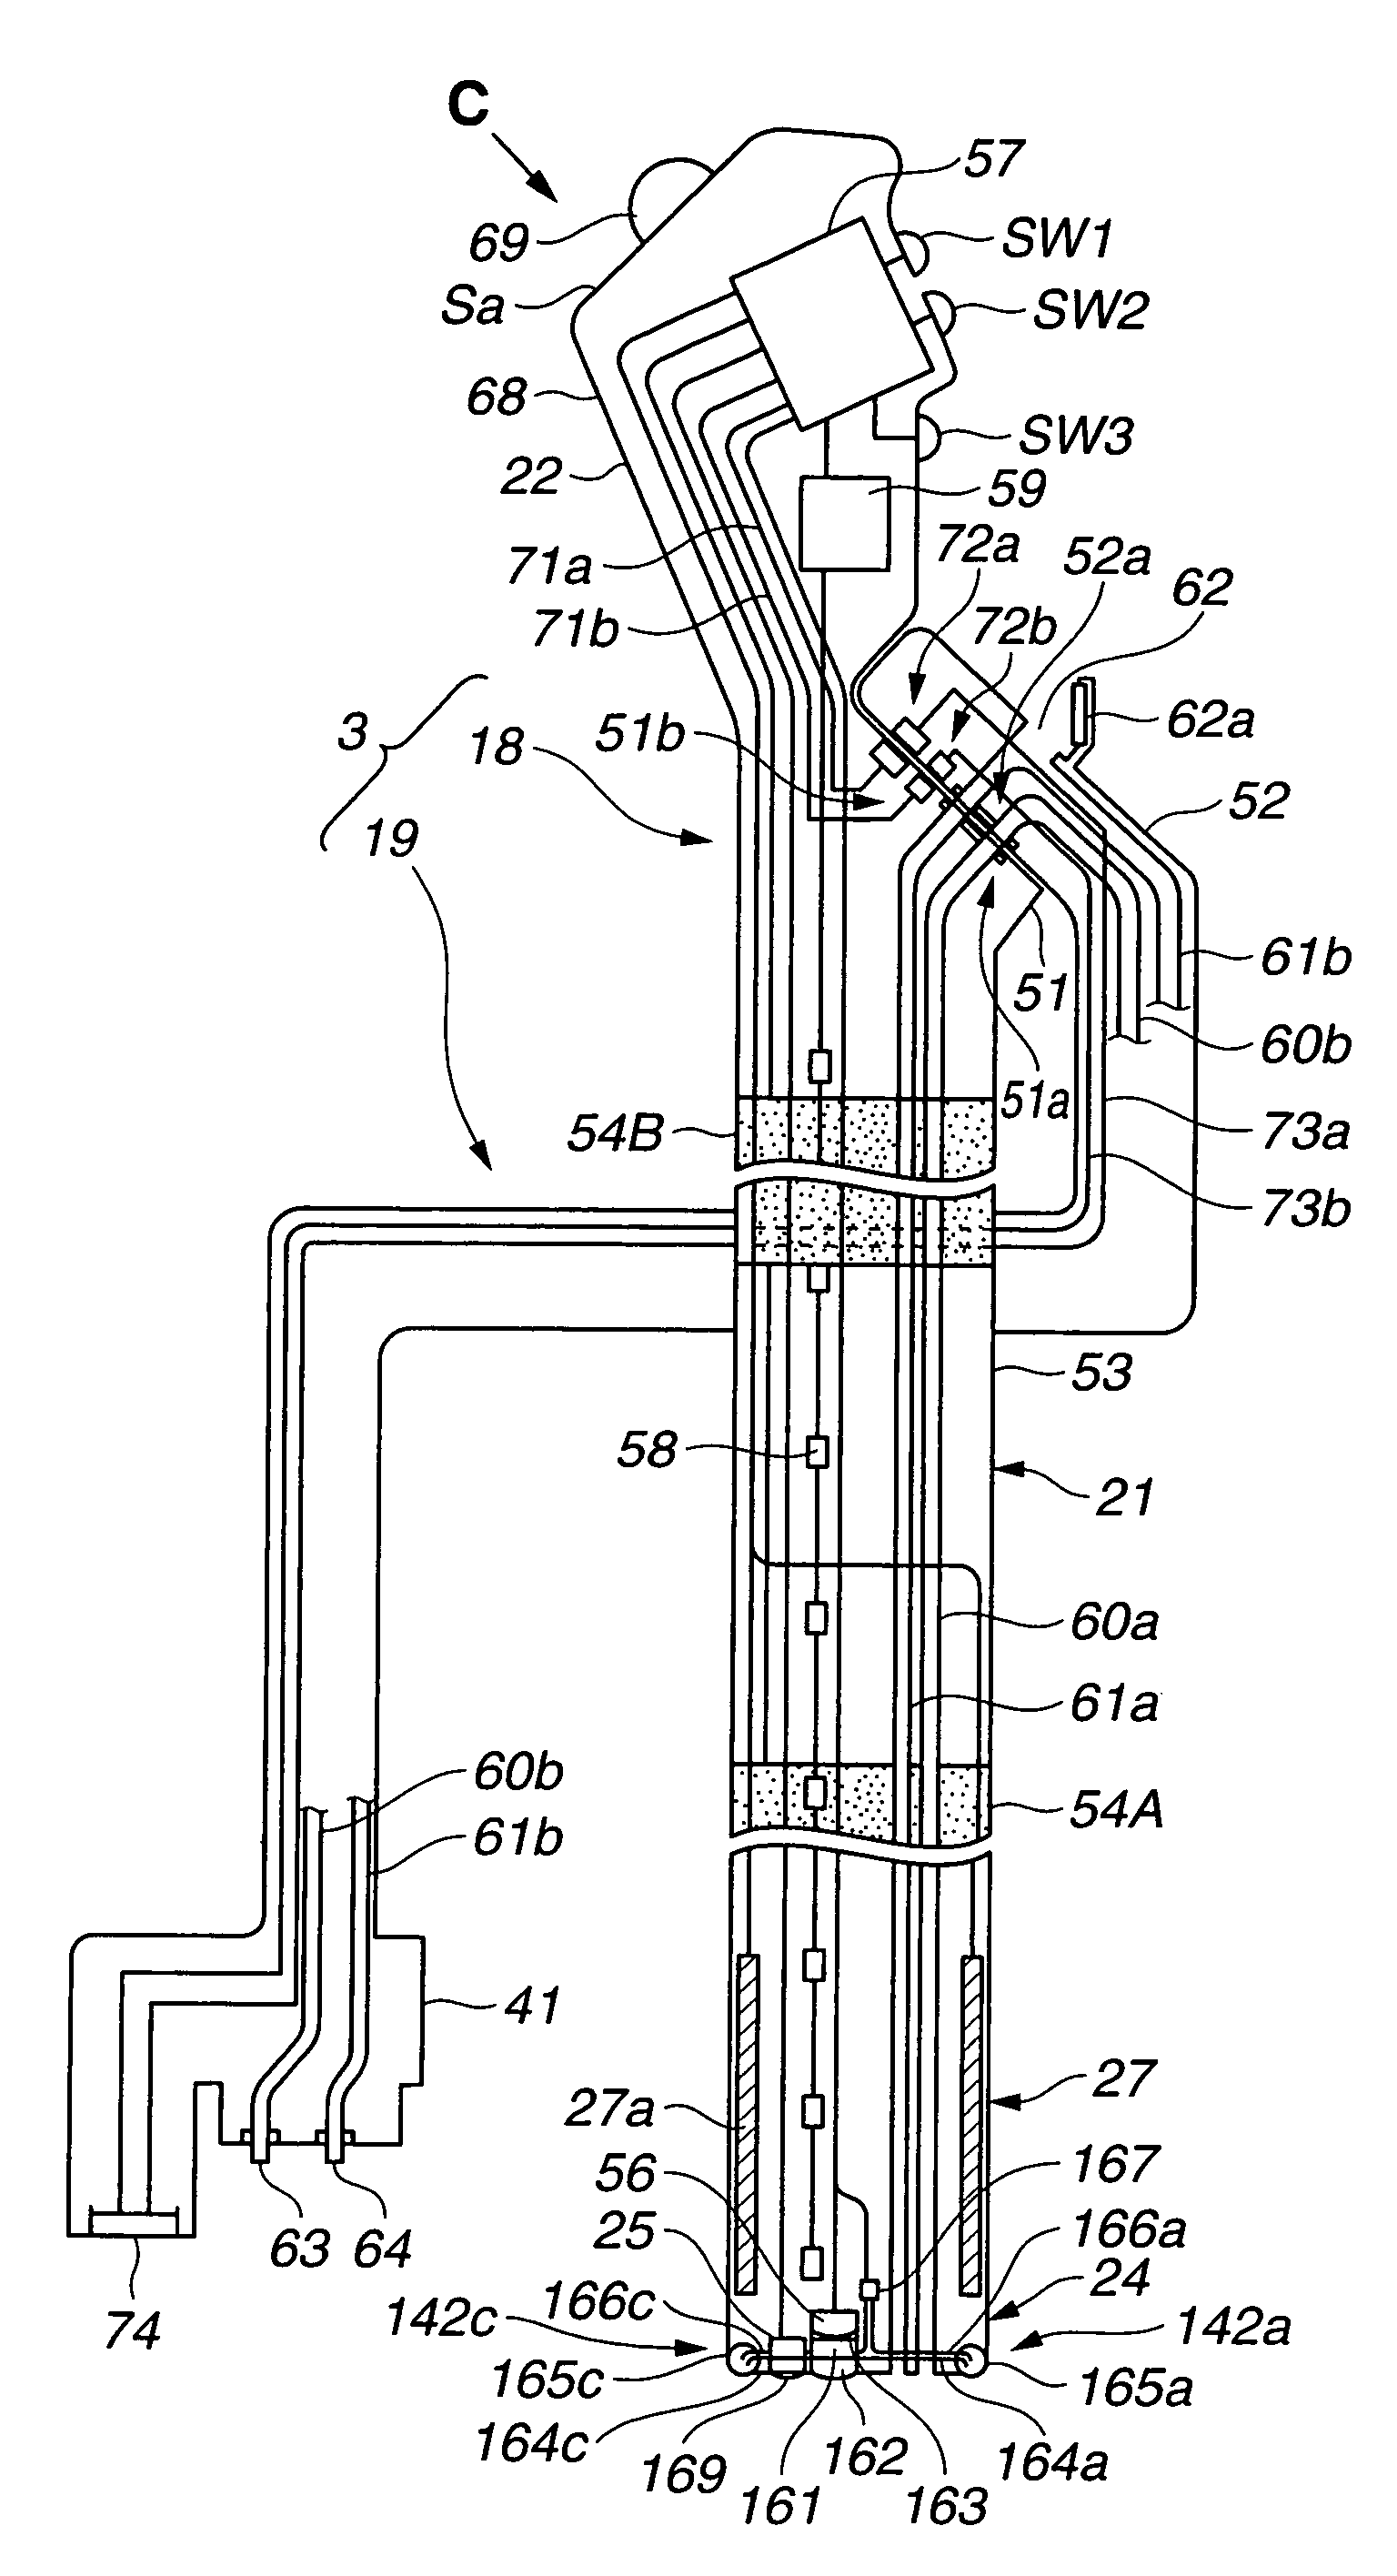 Endoscope and endoscopic system